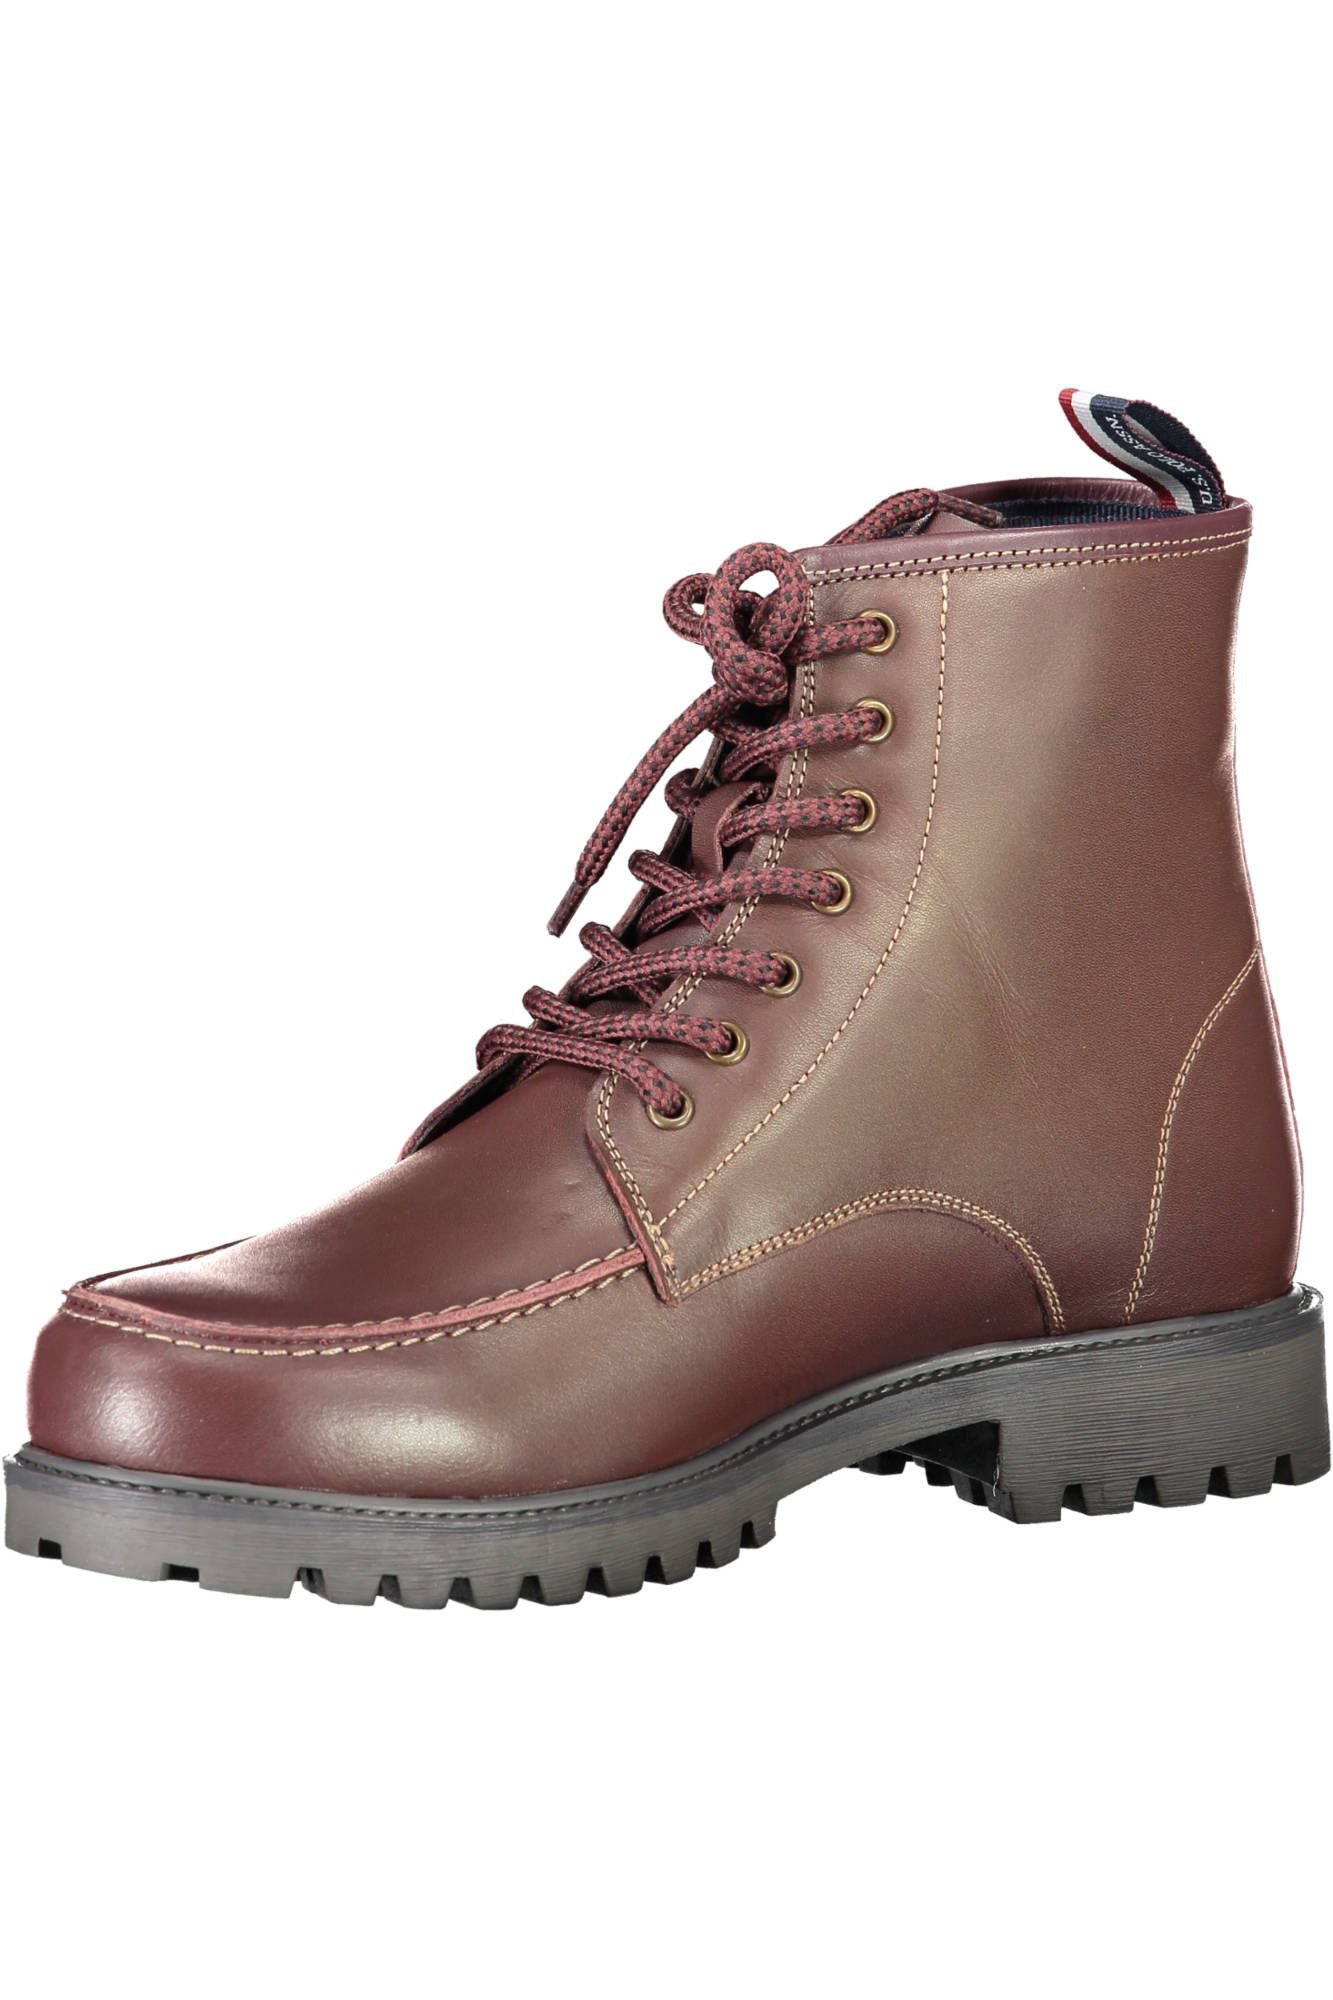 U.S. POLO ASSN. Equestrian Charm Lace-up Leather Boots